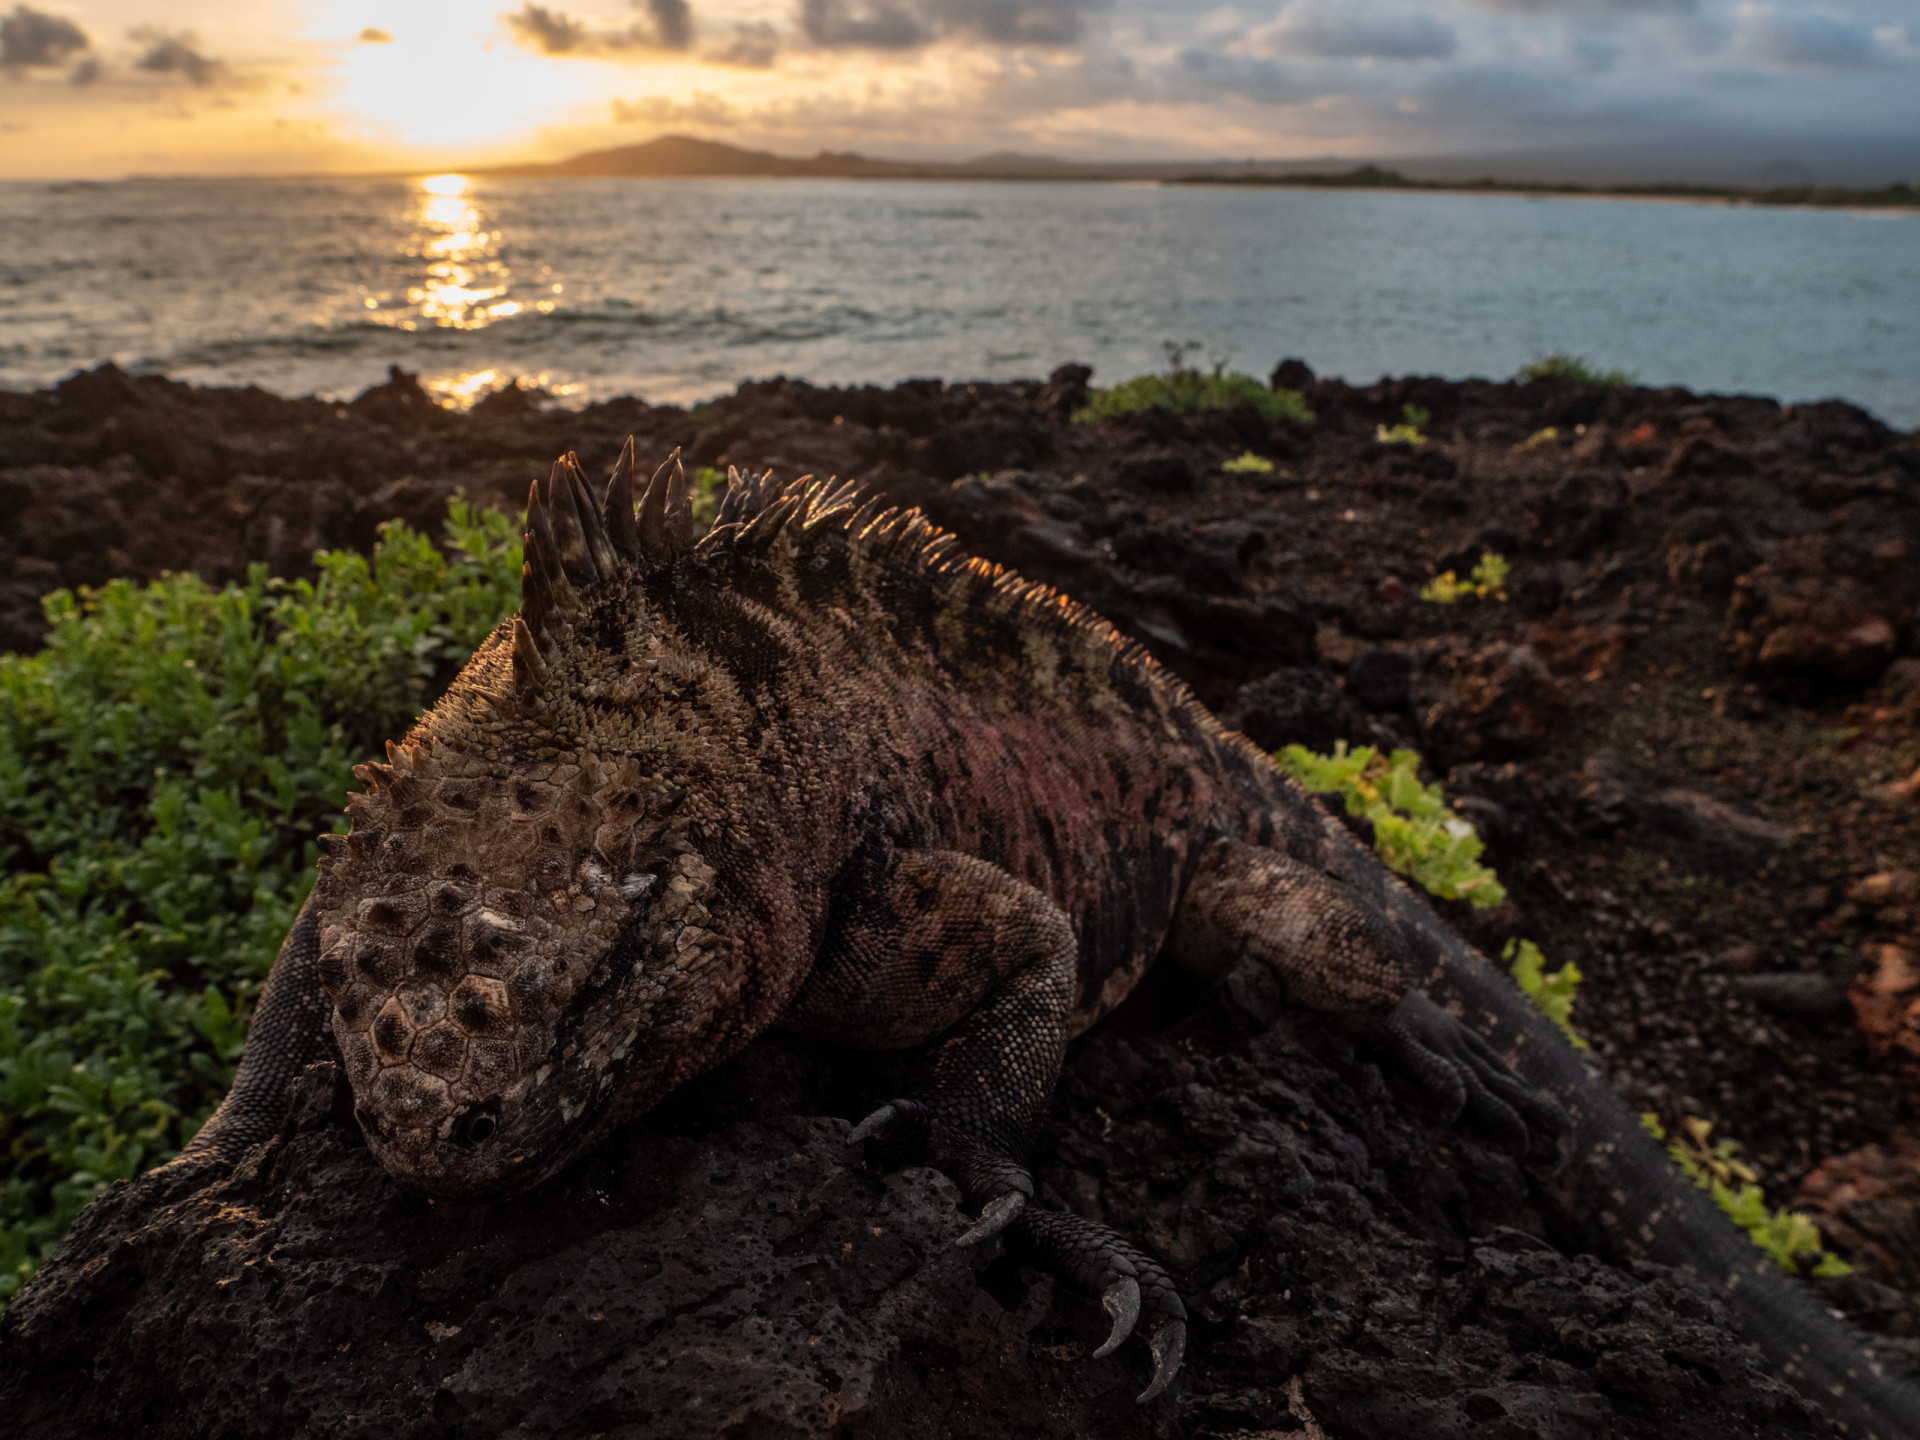 <p>The Journey to Nature's Edge expedition is a once-in-a-lifetime trip for anyone with a spare US$1.4 million. Taking place across 111 days and 12 countries, you will view some of the world’s most vulnerable species, including the Galápagos' marine iguana.</p>